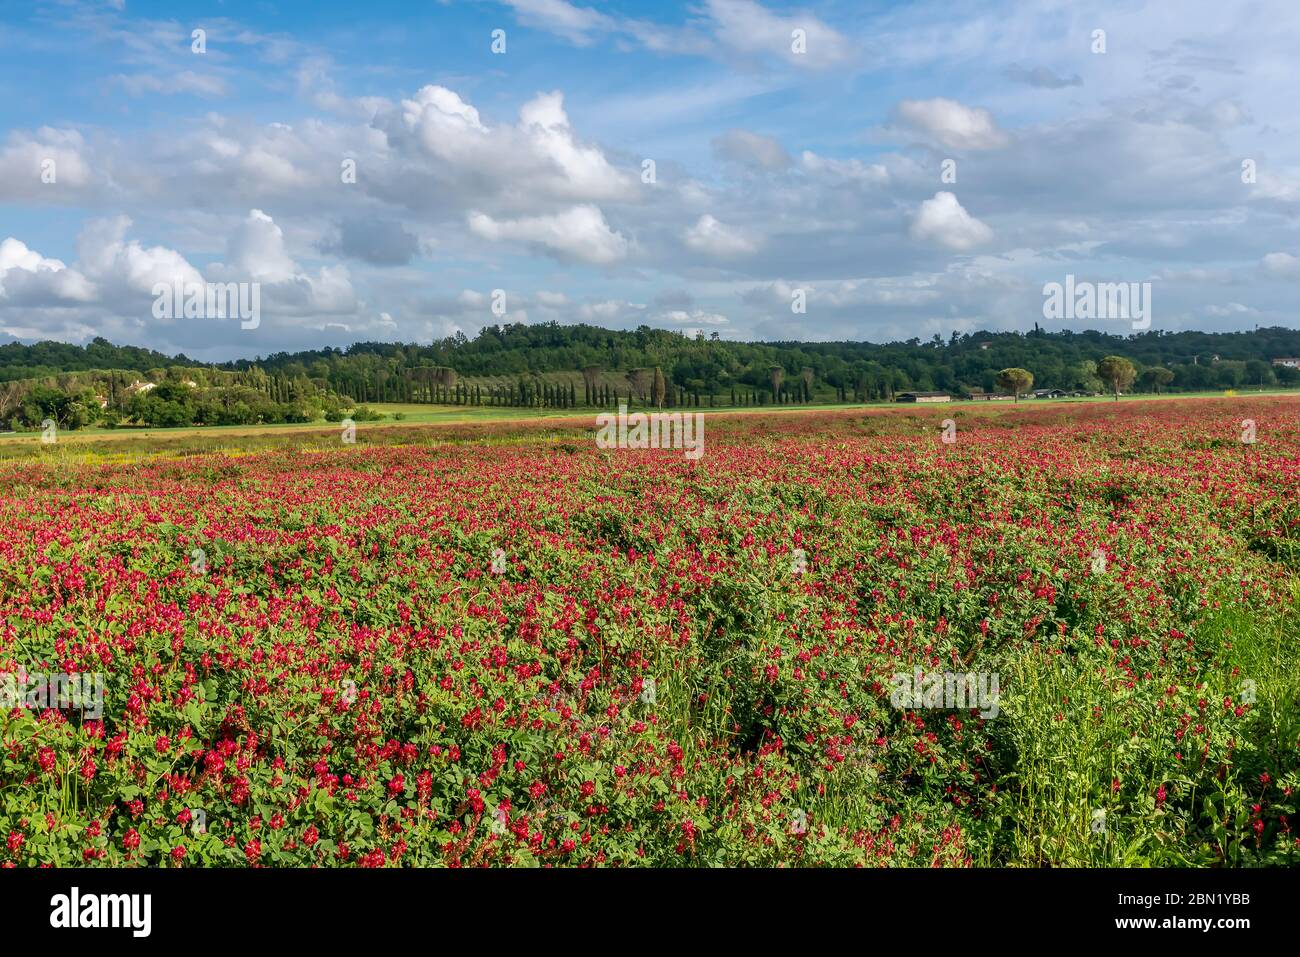 A field covered with red flowers of Hedysarum coronarium commonly called french honeysuckle, with a row of cypresses in the background in the Tuscan c Stock Photo